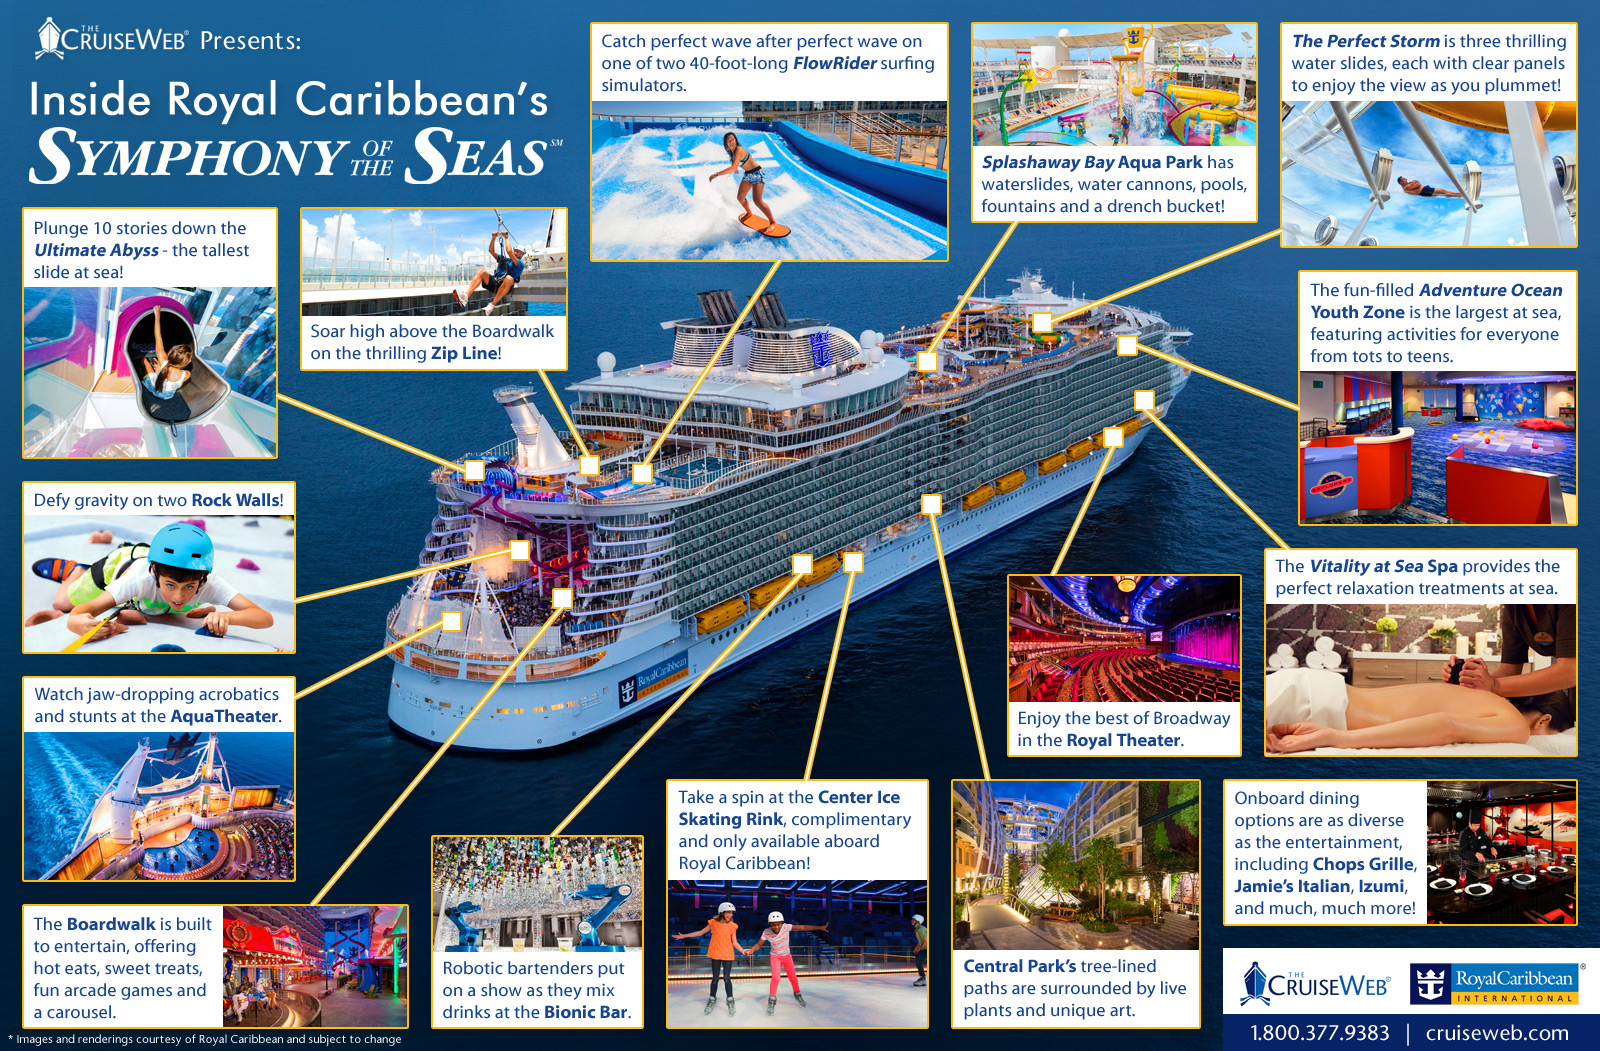 Royal Caribbean's Symphony of the Seas Cruise Ship, 2019, 2020 and 2021